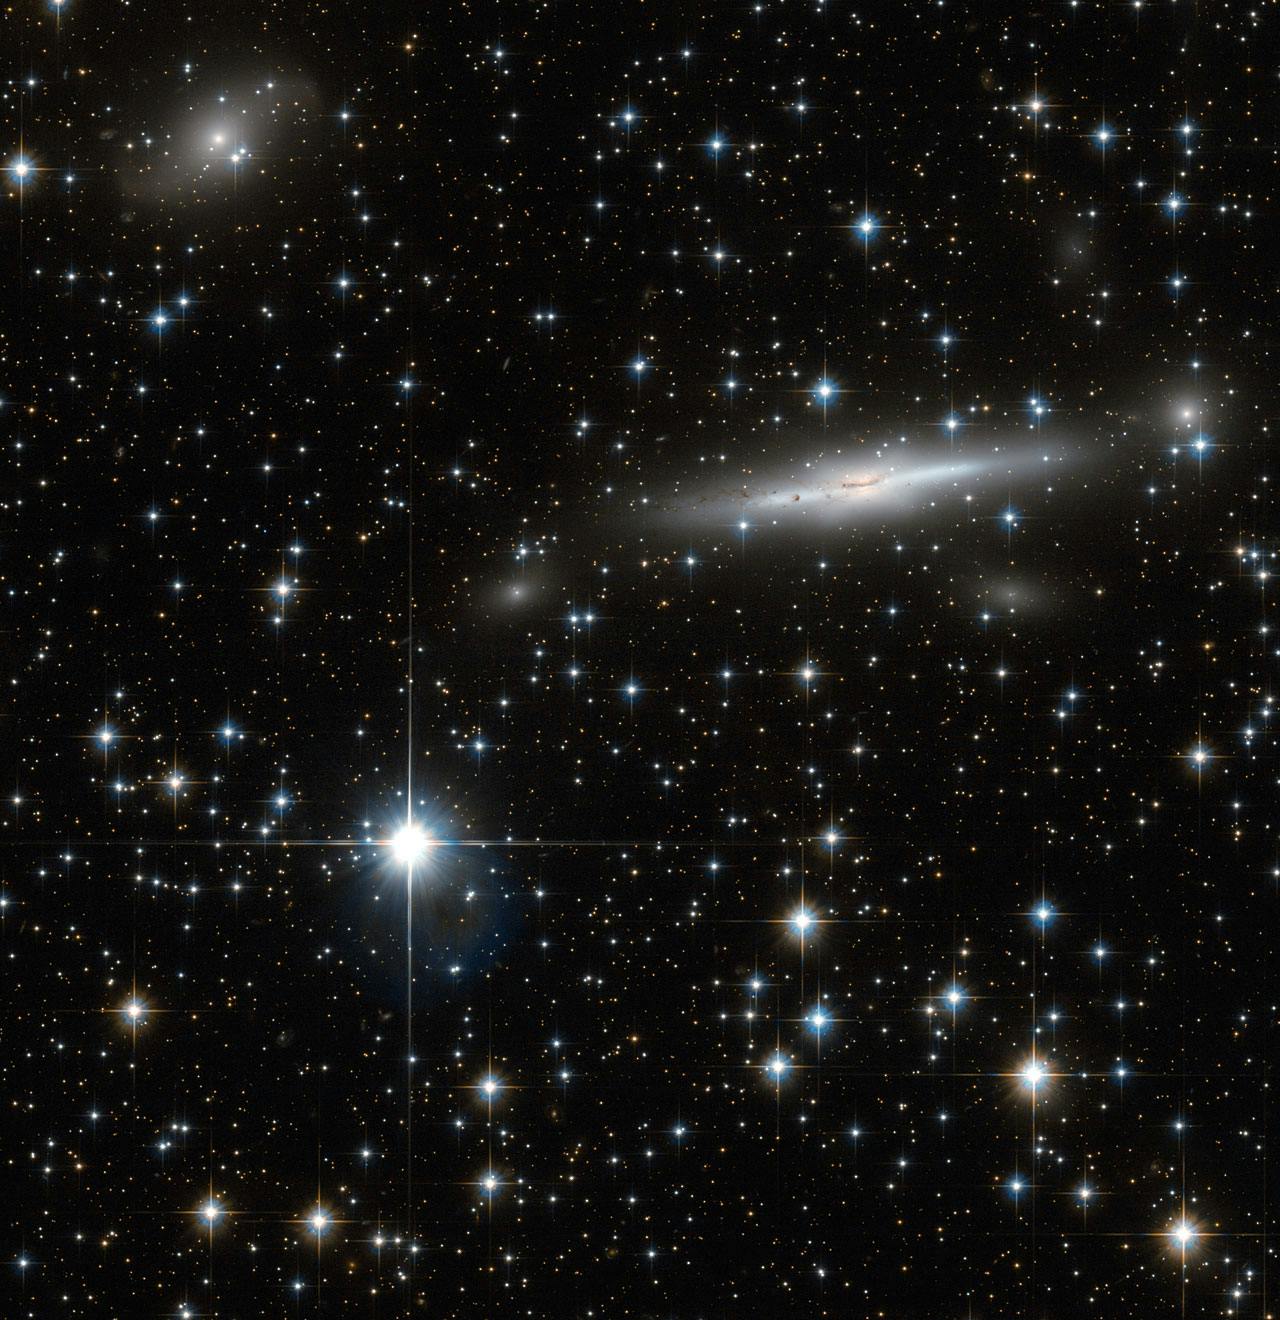 What’s The Great Attractor?